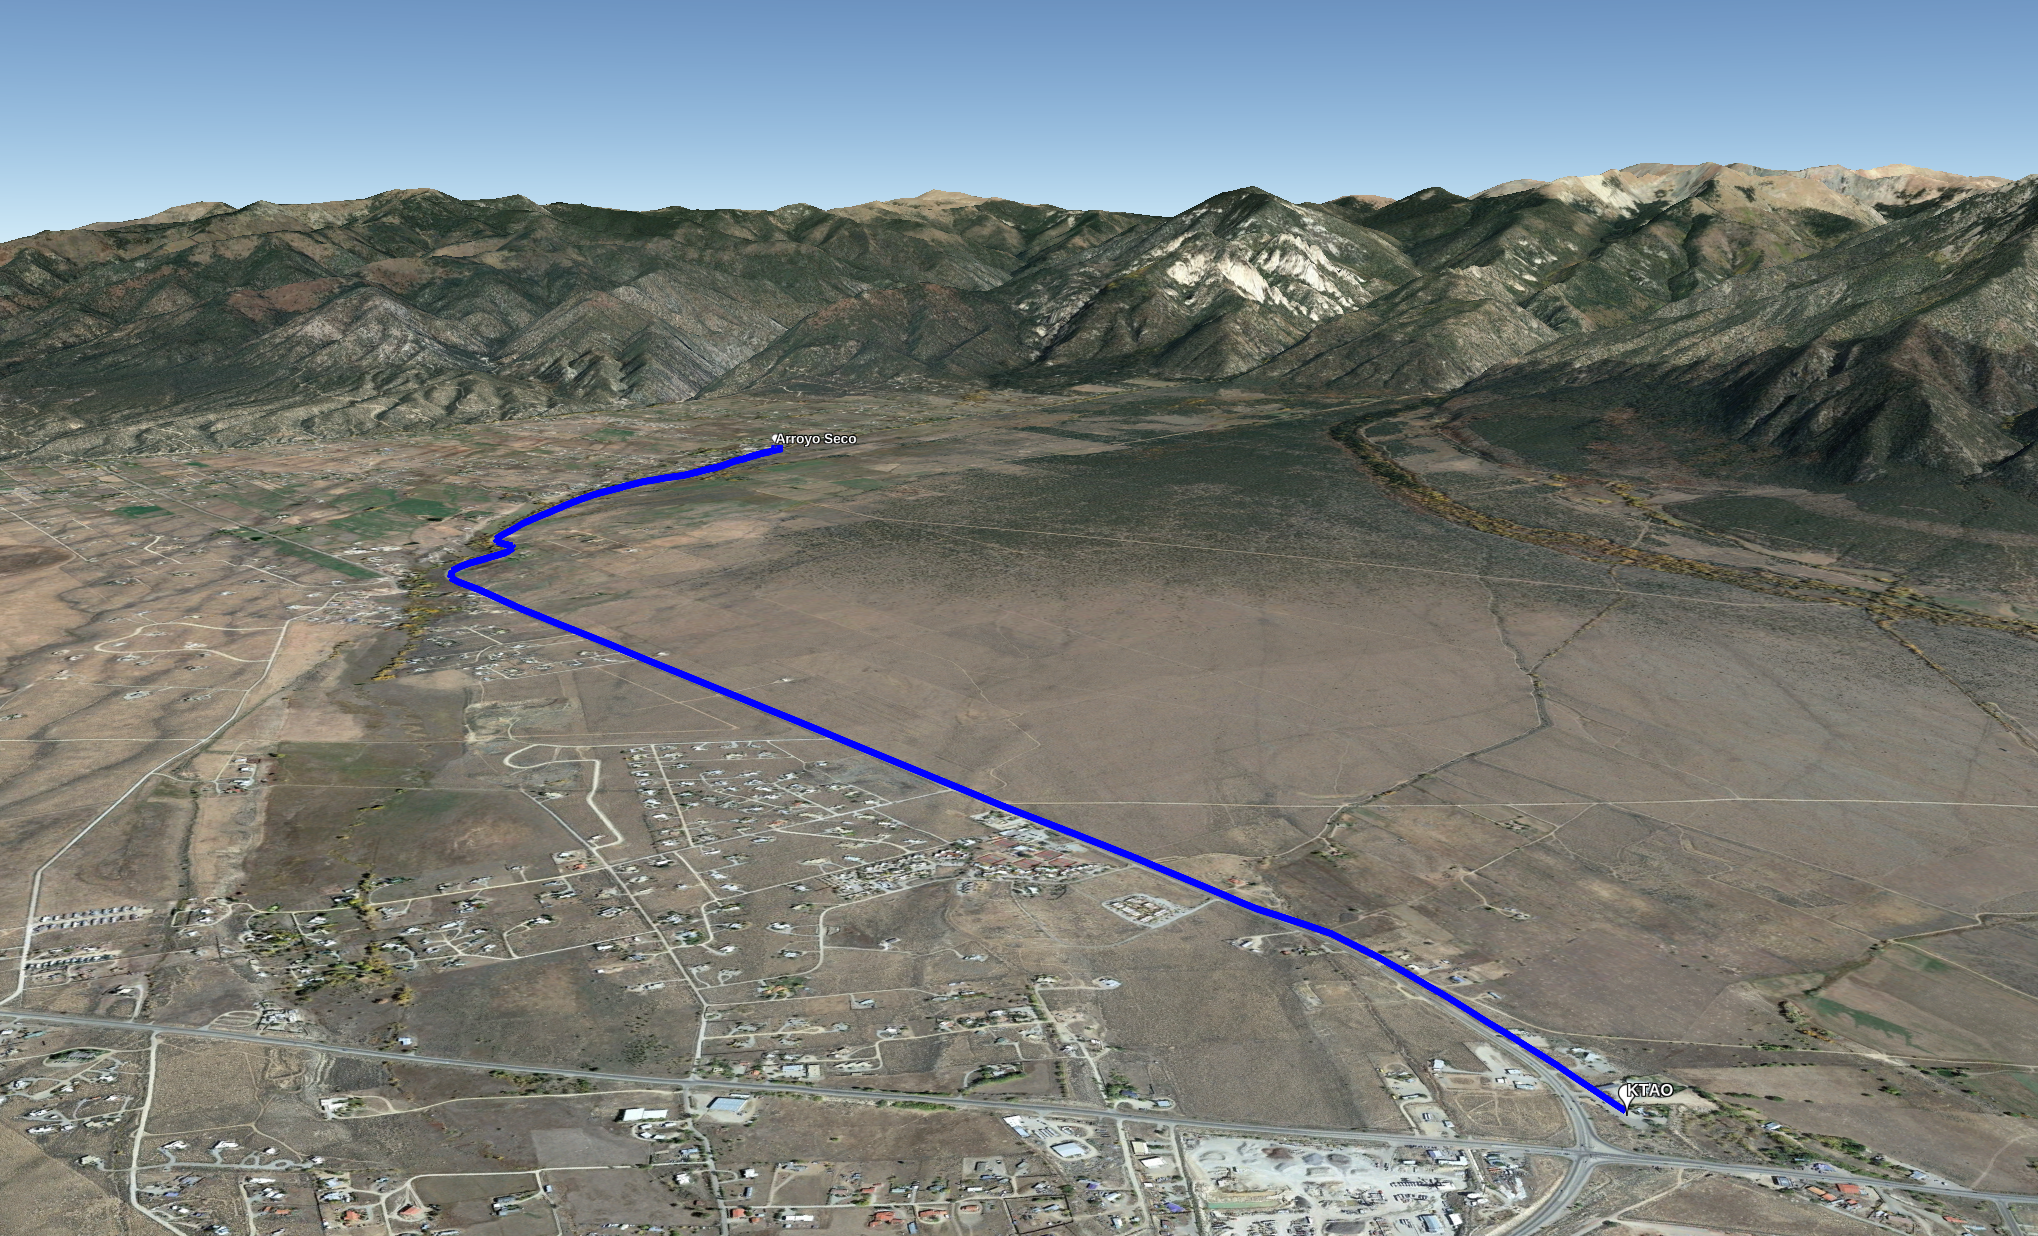 Planned route of NM 150 recreational pathway between KTAO and Arroyo Seco